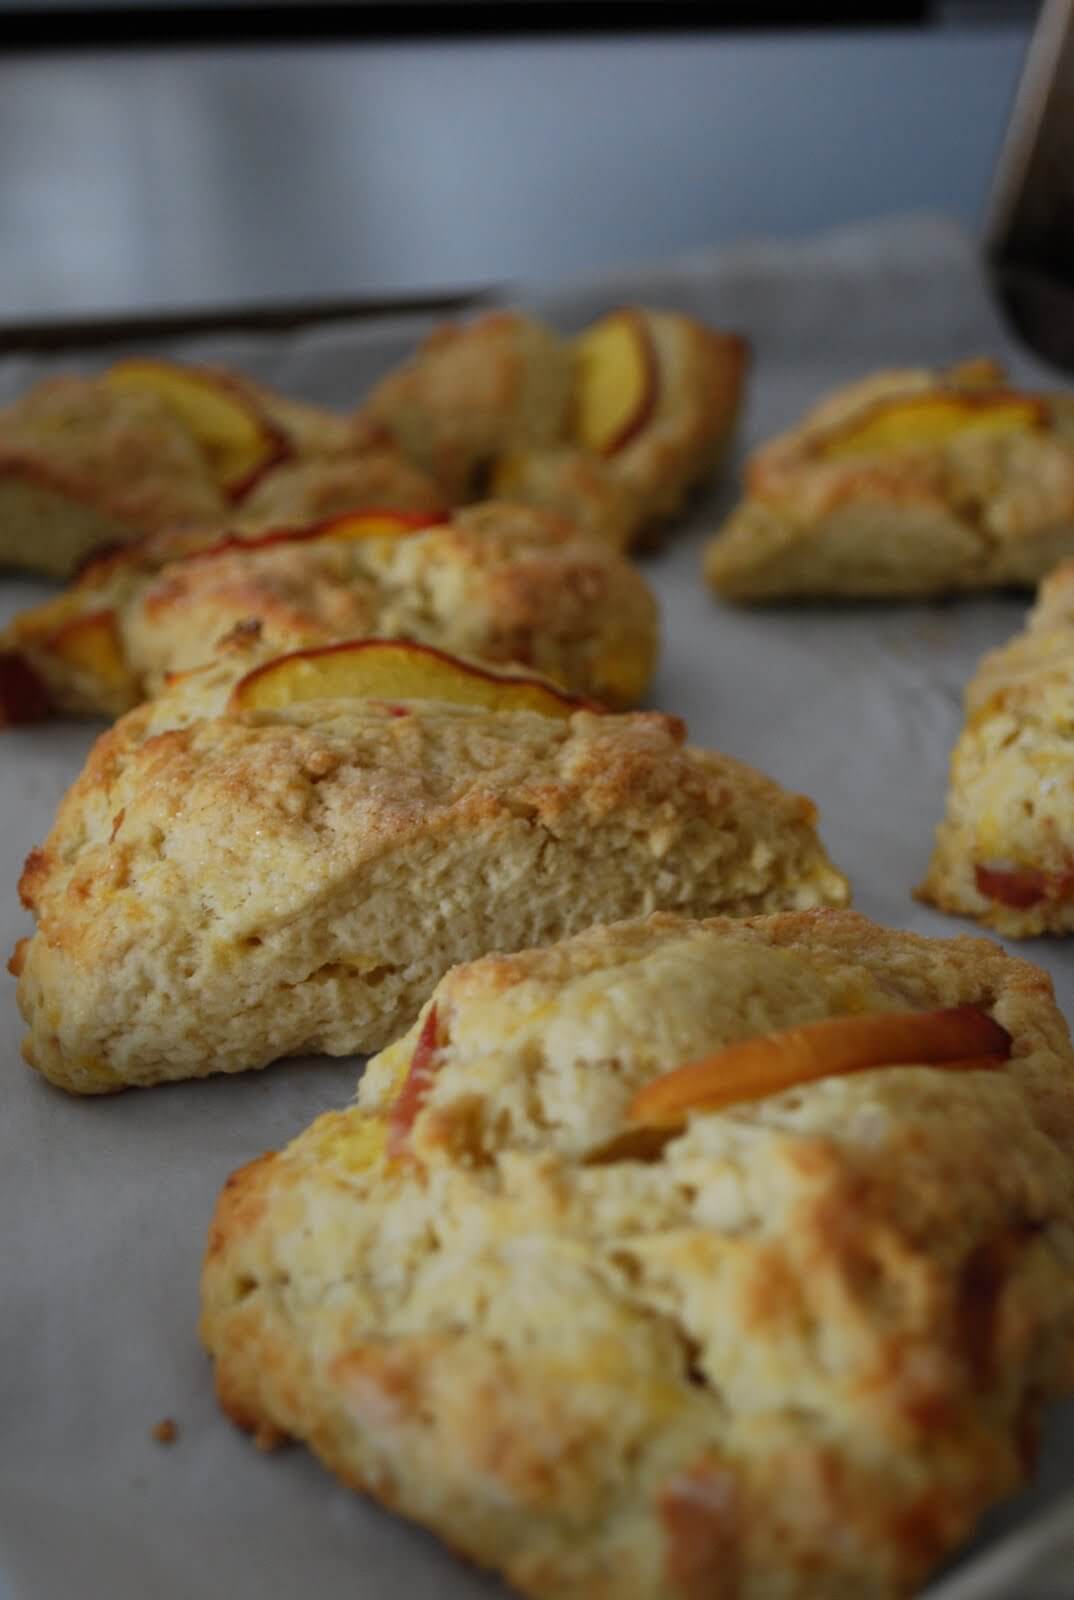 Cream from a local dairy and farm fresh peaches make this simple peach scone recipe a standout. Perfect for a summer brunch or as a complement to your morning cup of tea. 